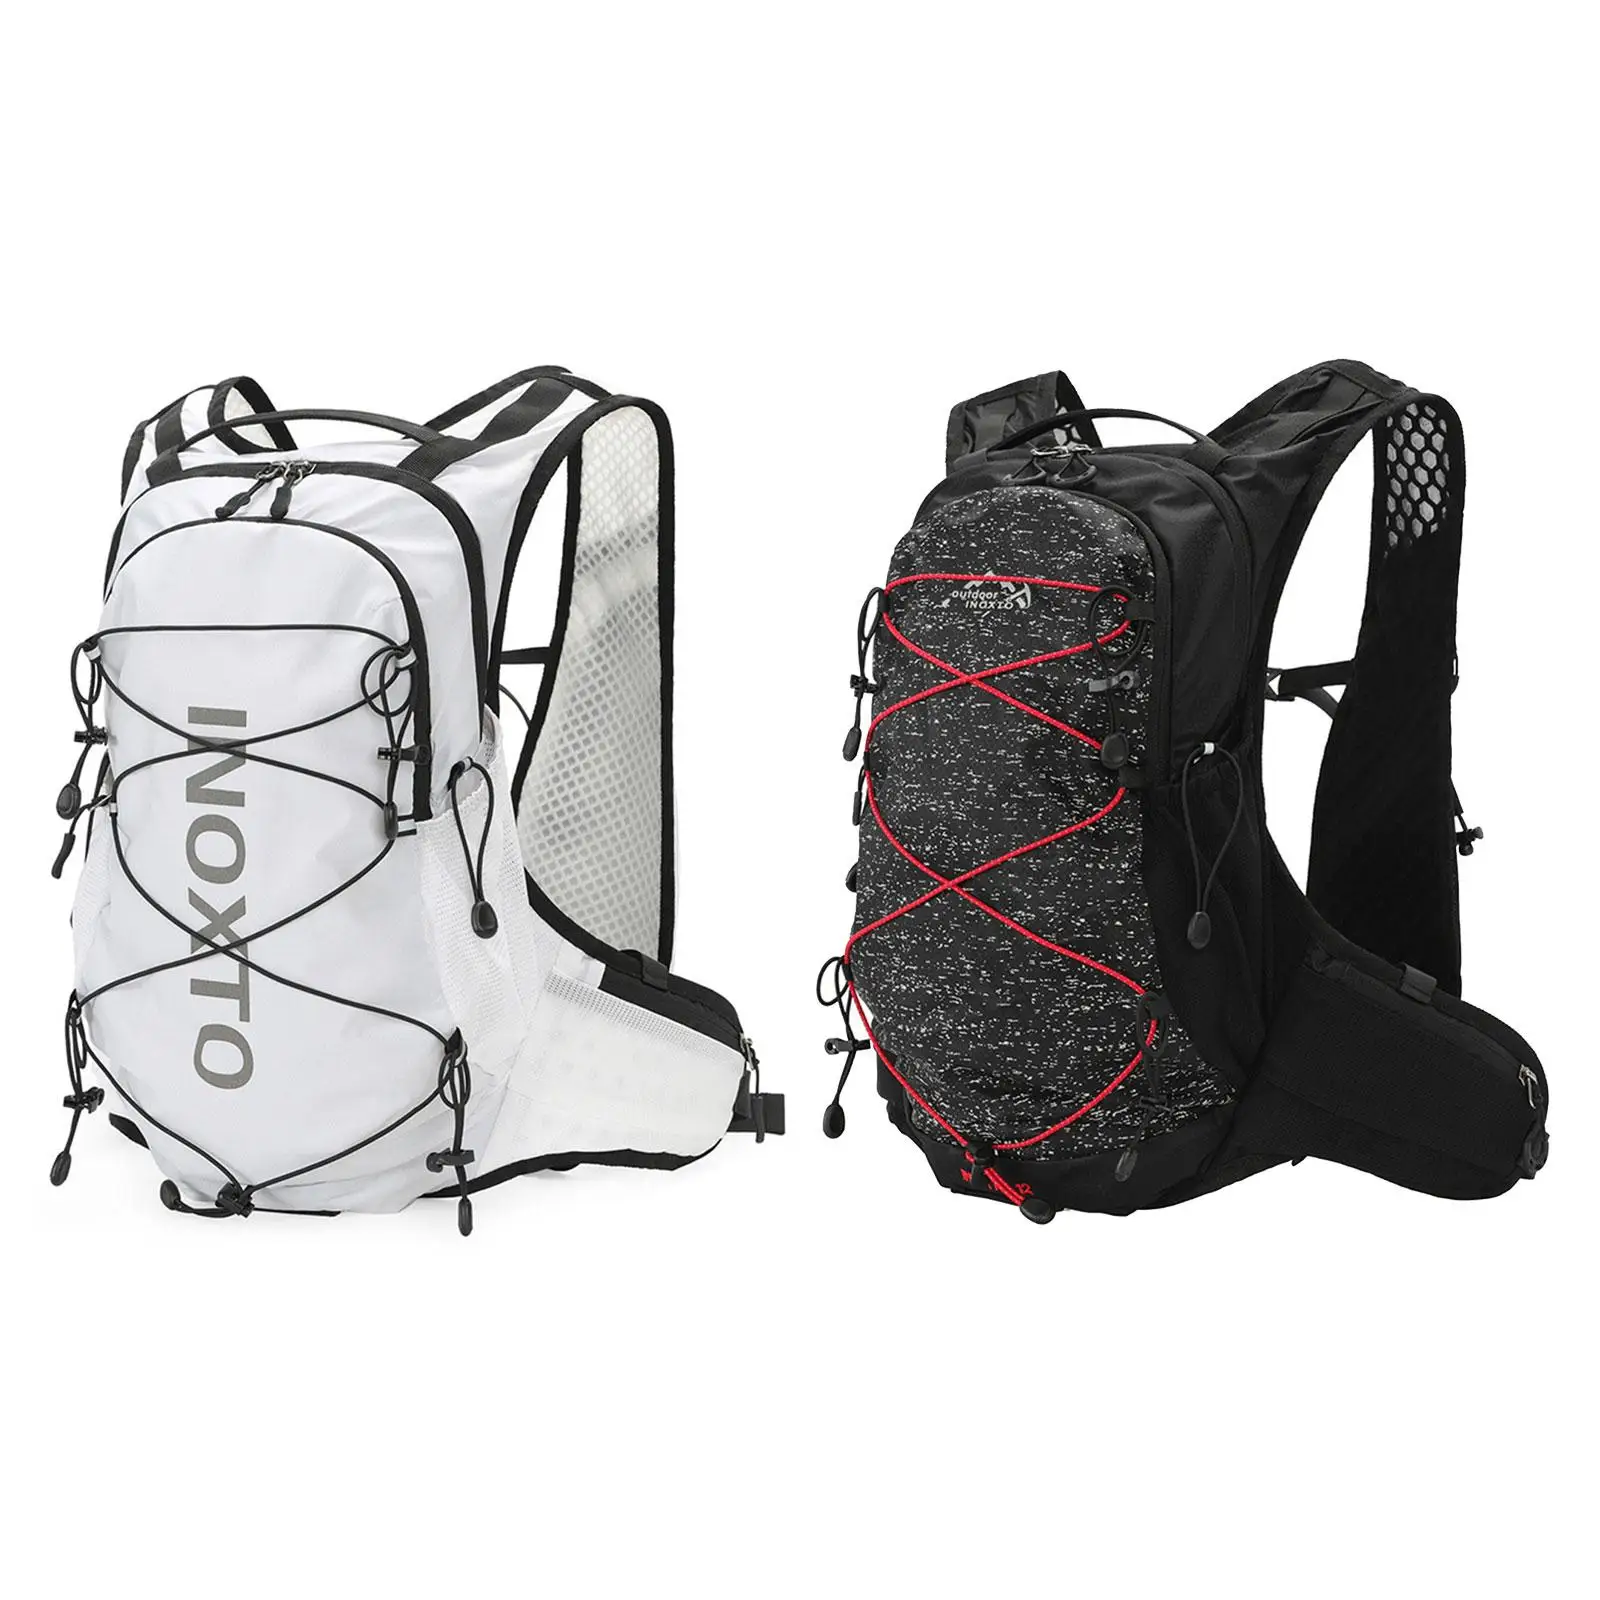 12L Hydration Backpack Daypack Men Women Hydration Pack Hiking Backpack for Riding Mountain Climbing Camping Cycling Hiking